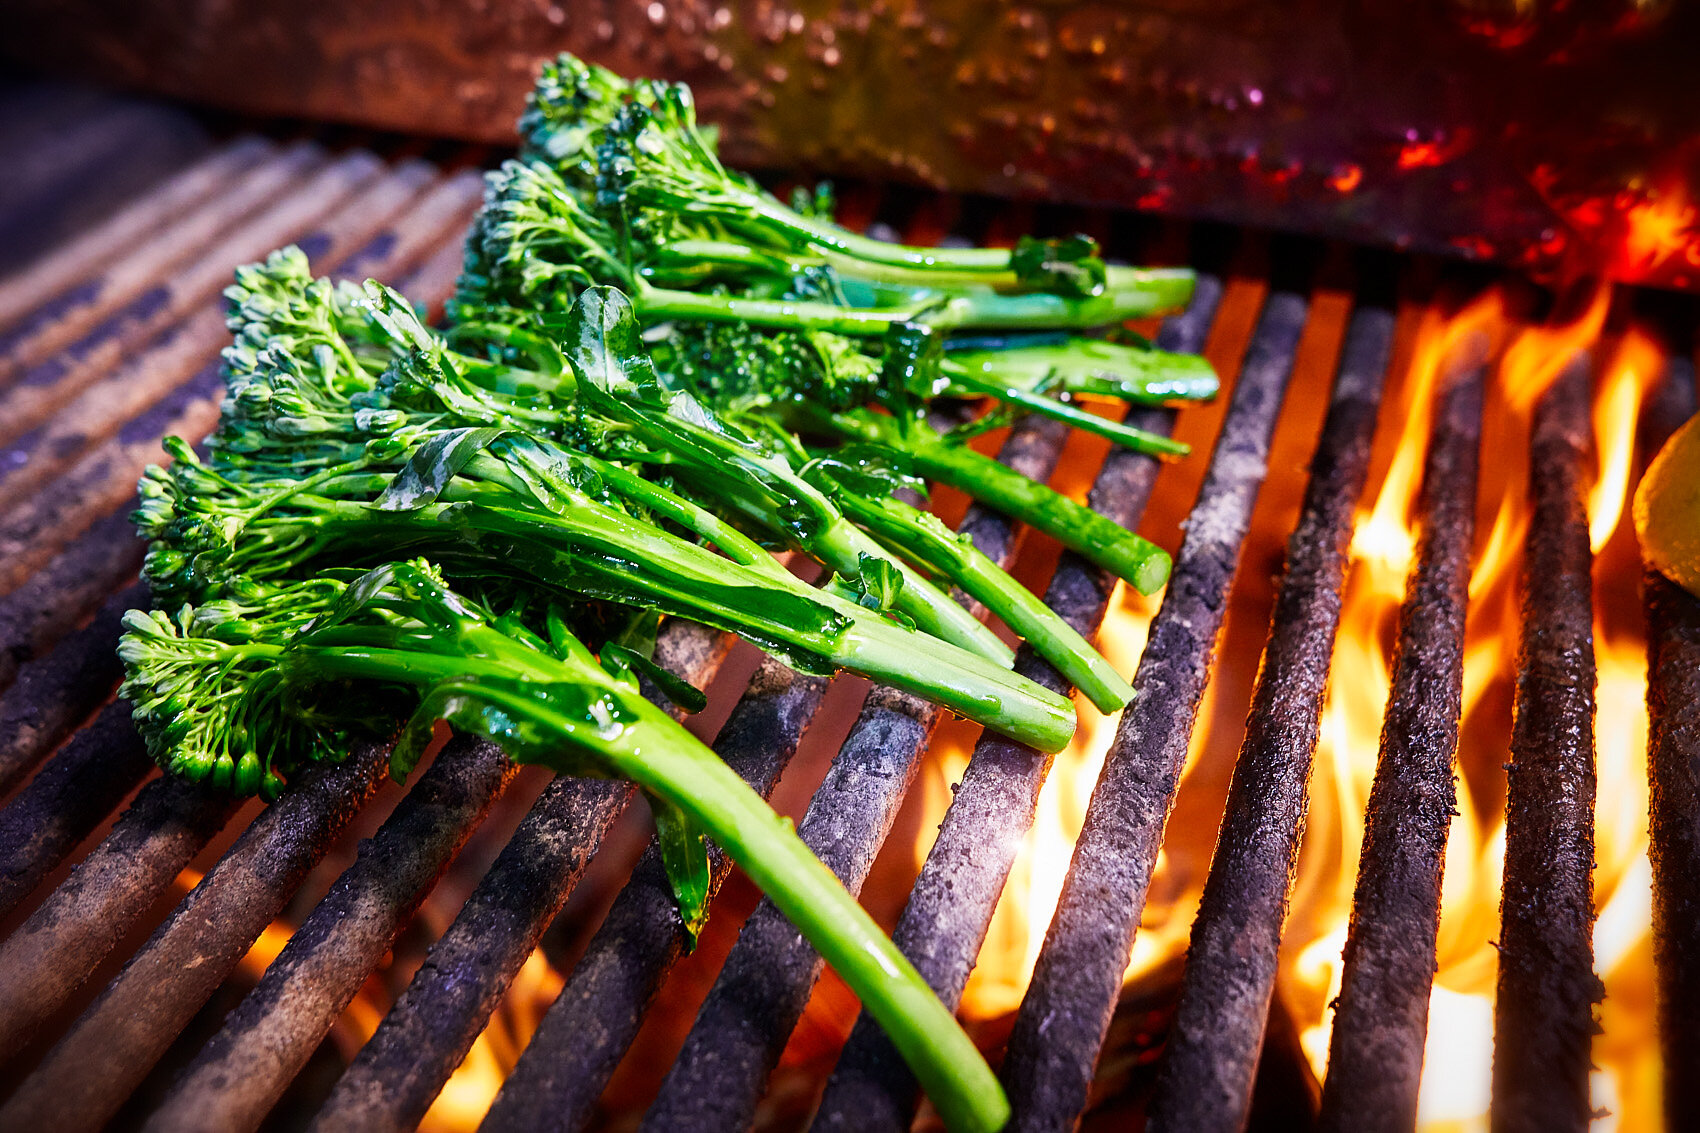 grilled broccoli